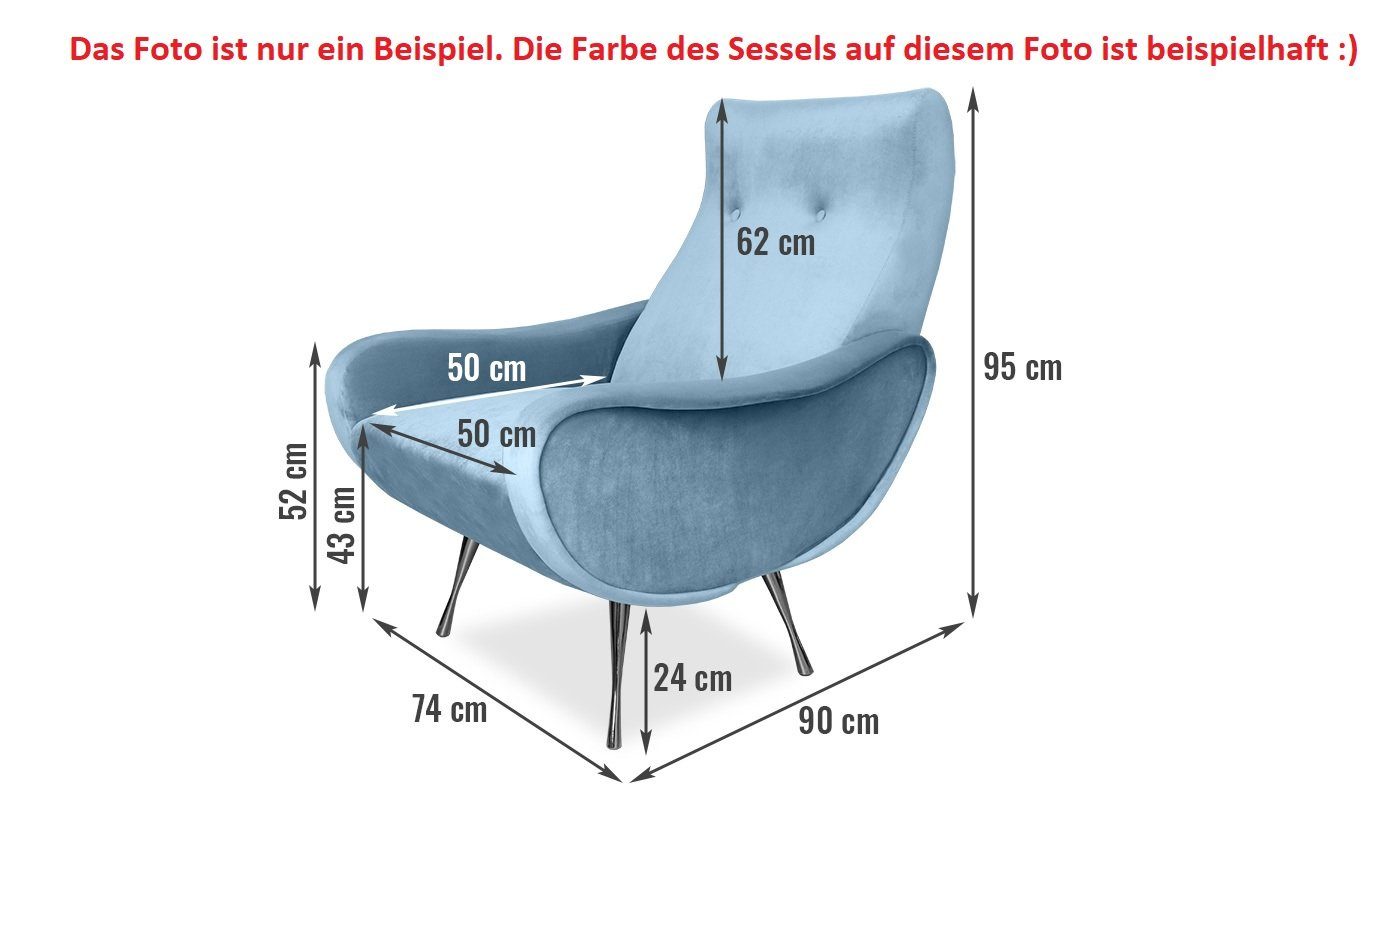 ROYAL Lesesessel Relaxsessel, Couchsessel, Grau Sessel, TV-Sessel Fernsehsessel, pressiode